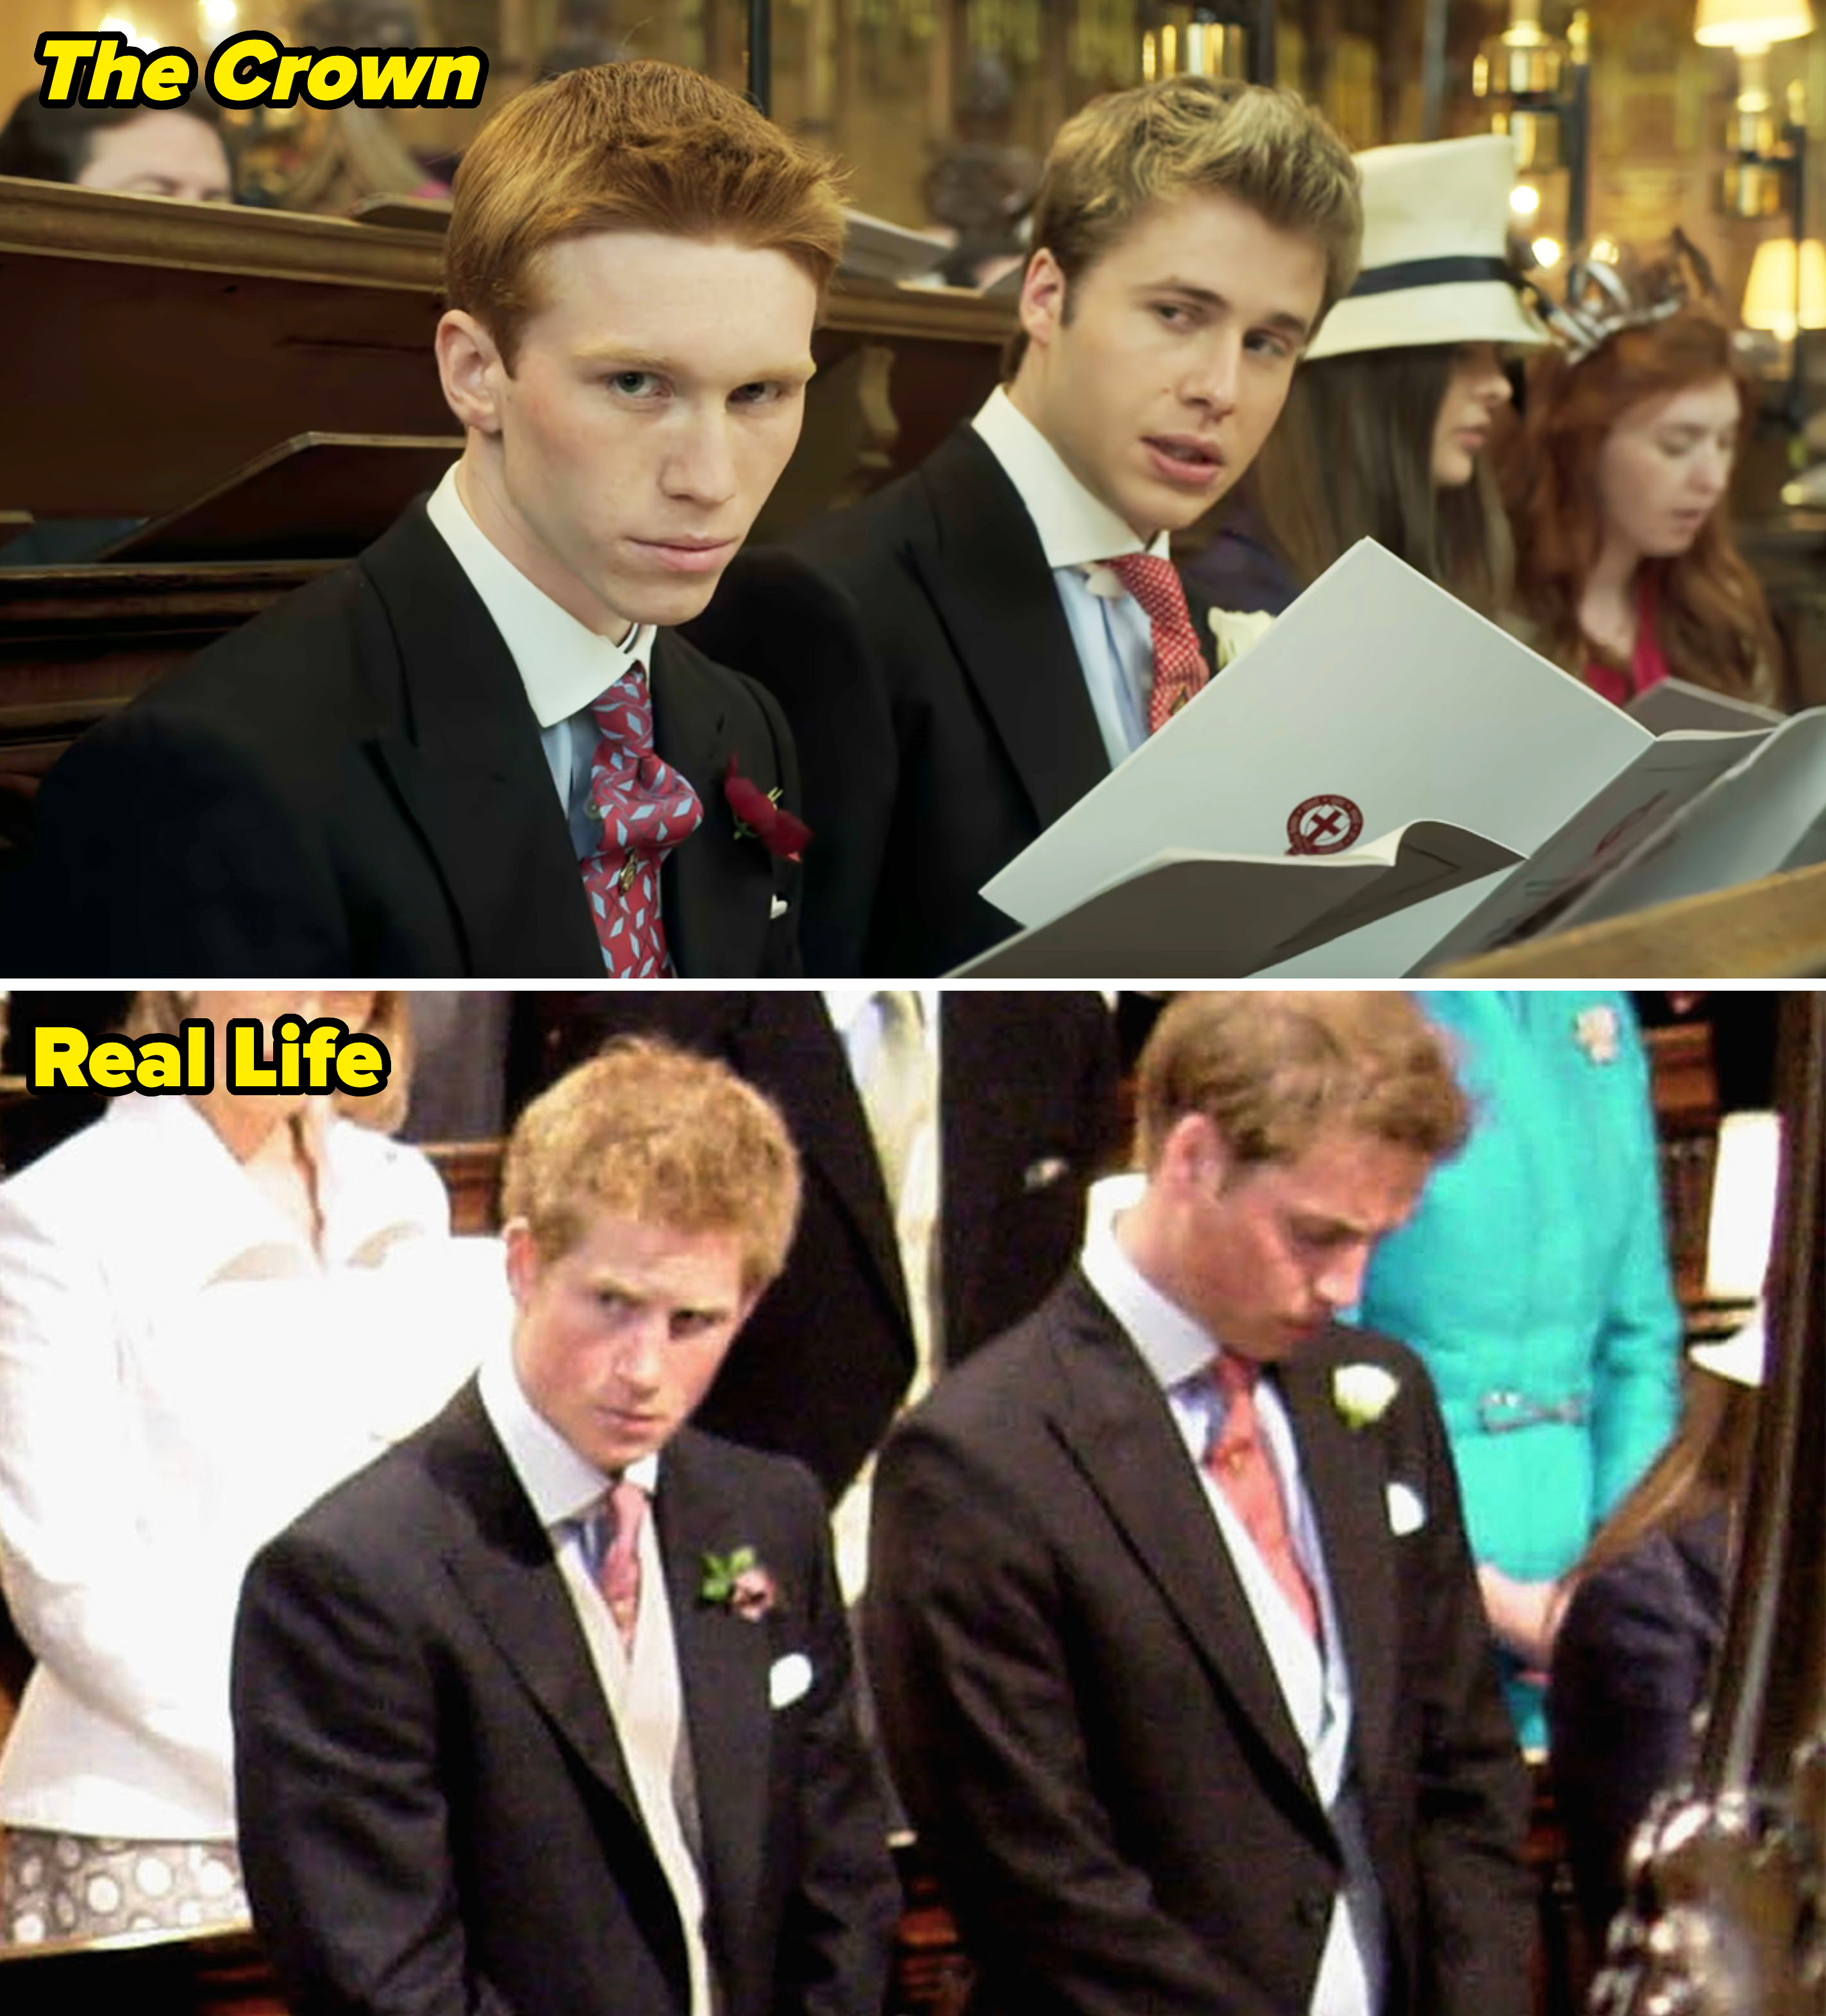 Princess Harry and William in real life vs. &quot;The Crown&quot;